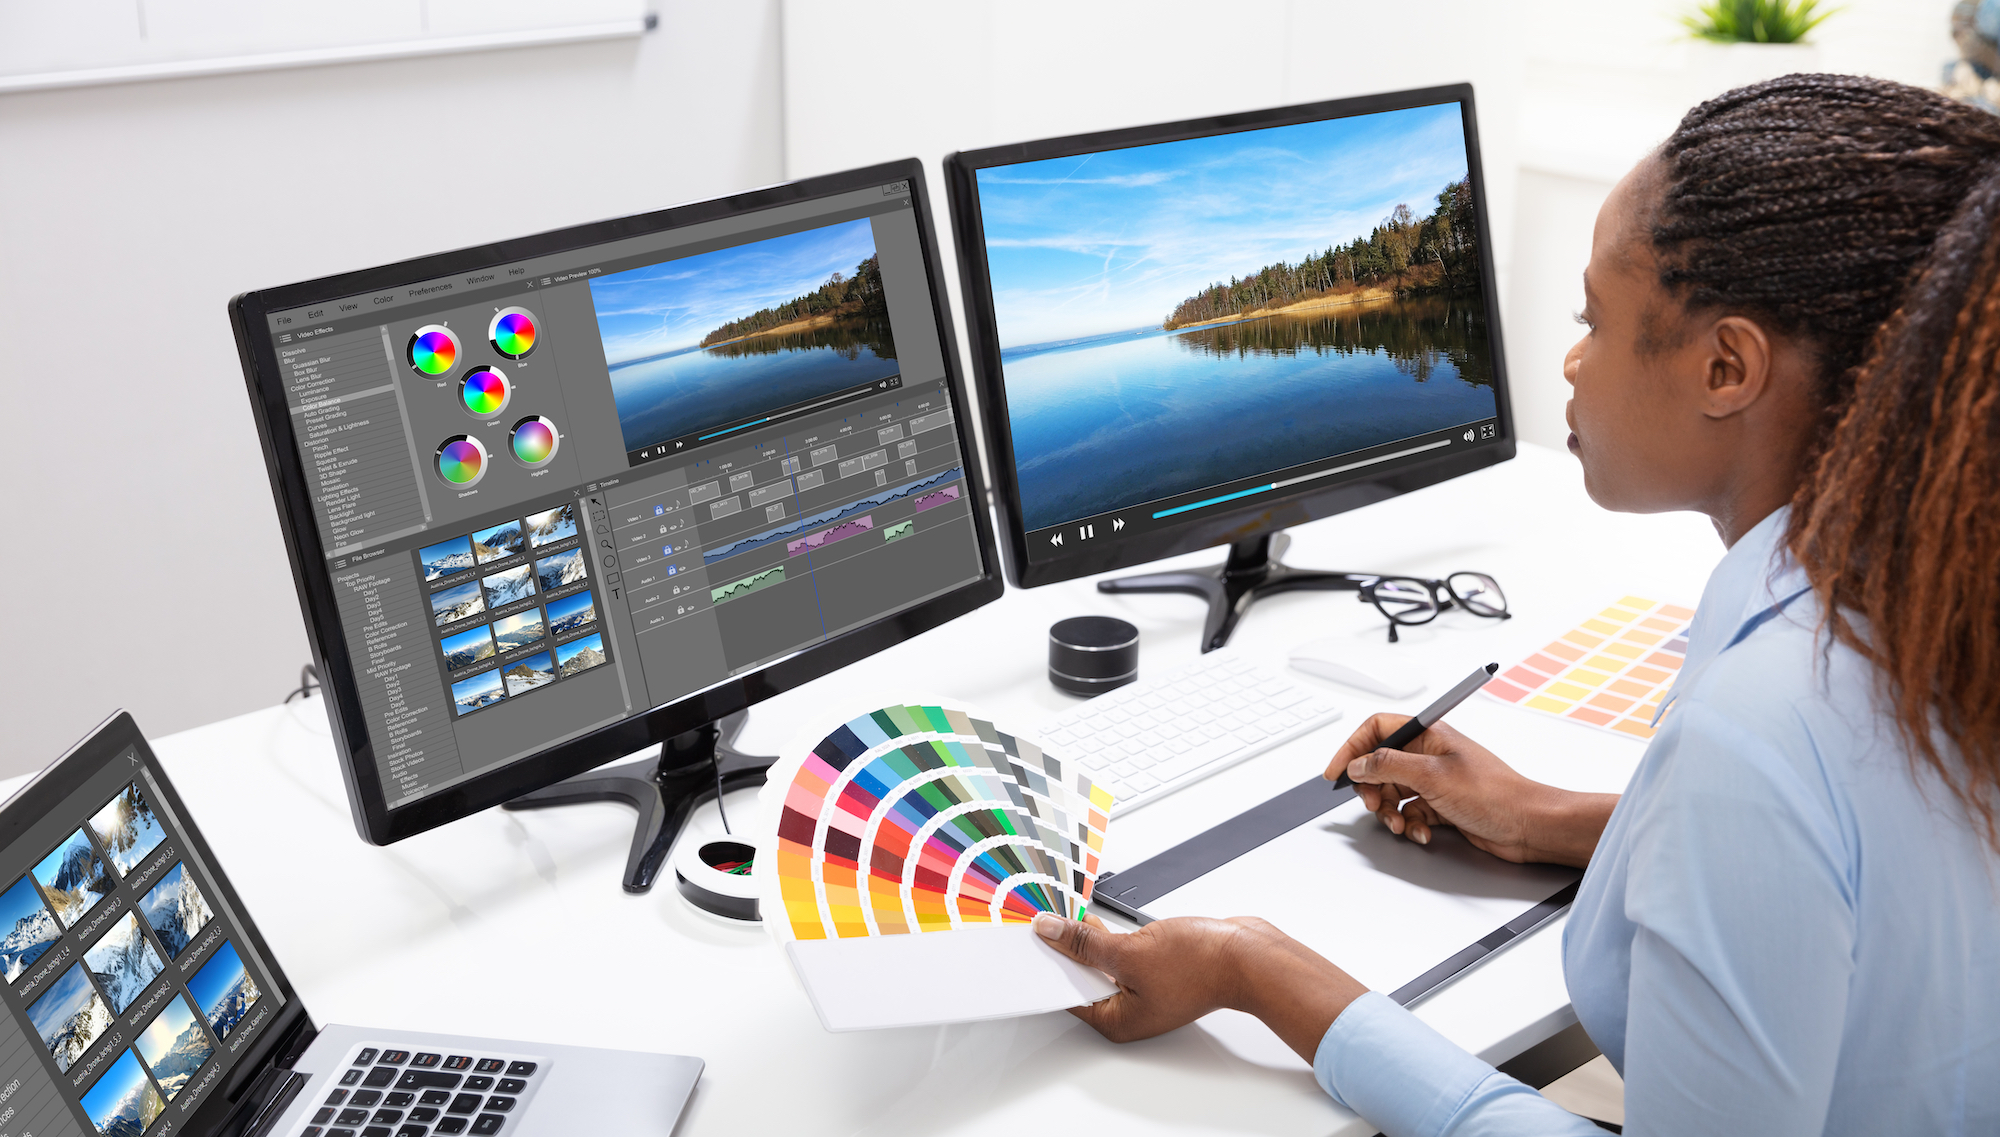 what is better for photo editing mac or pc